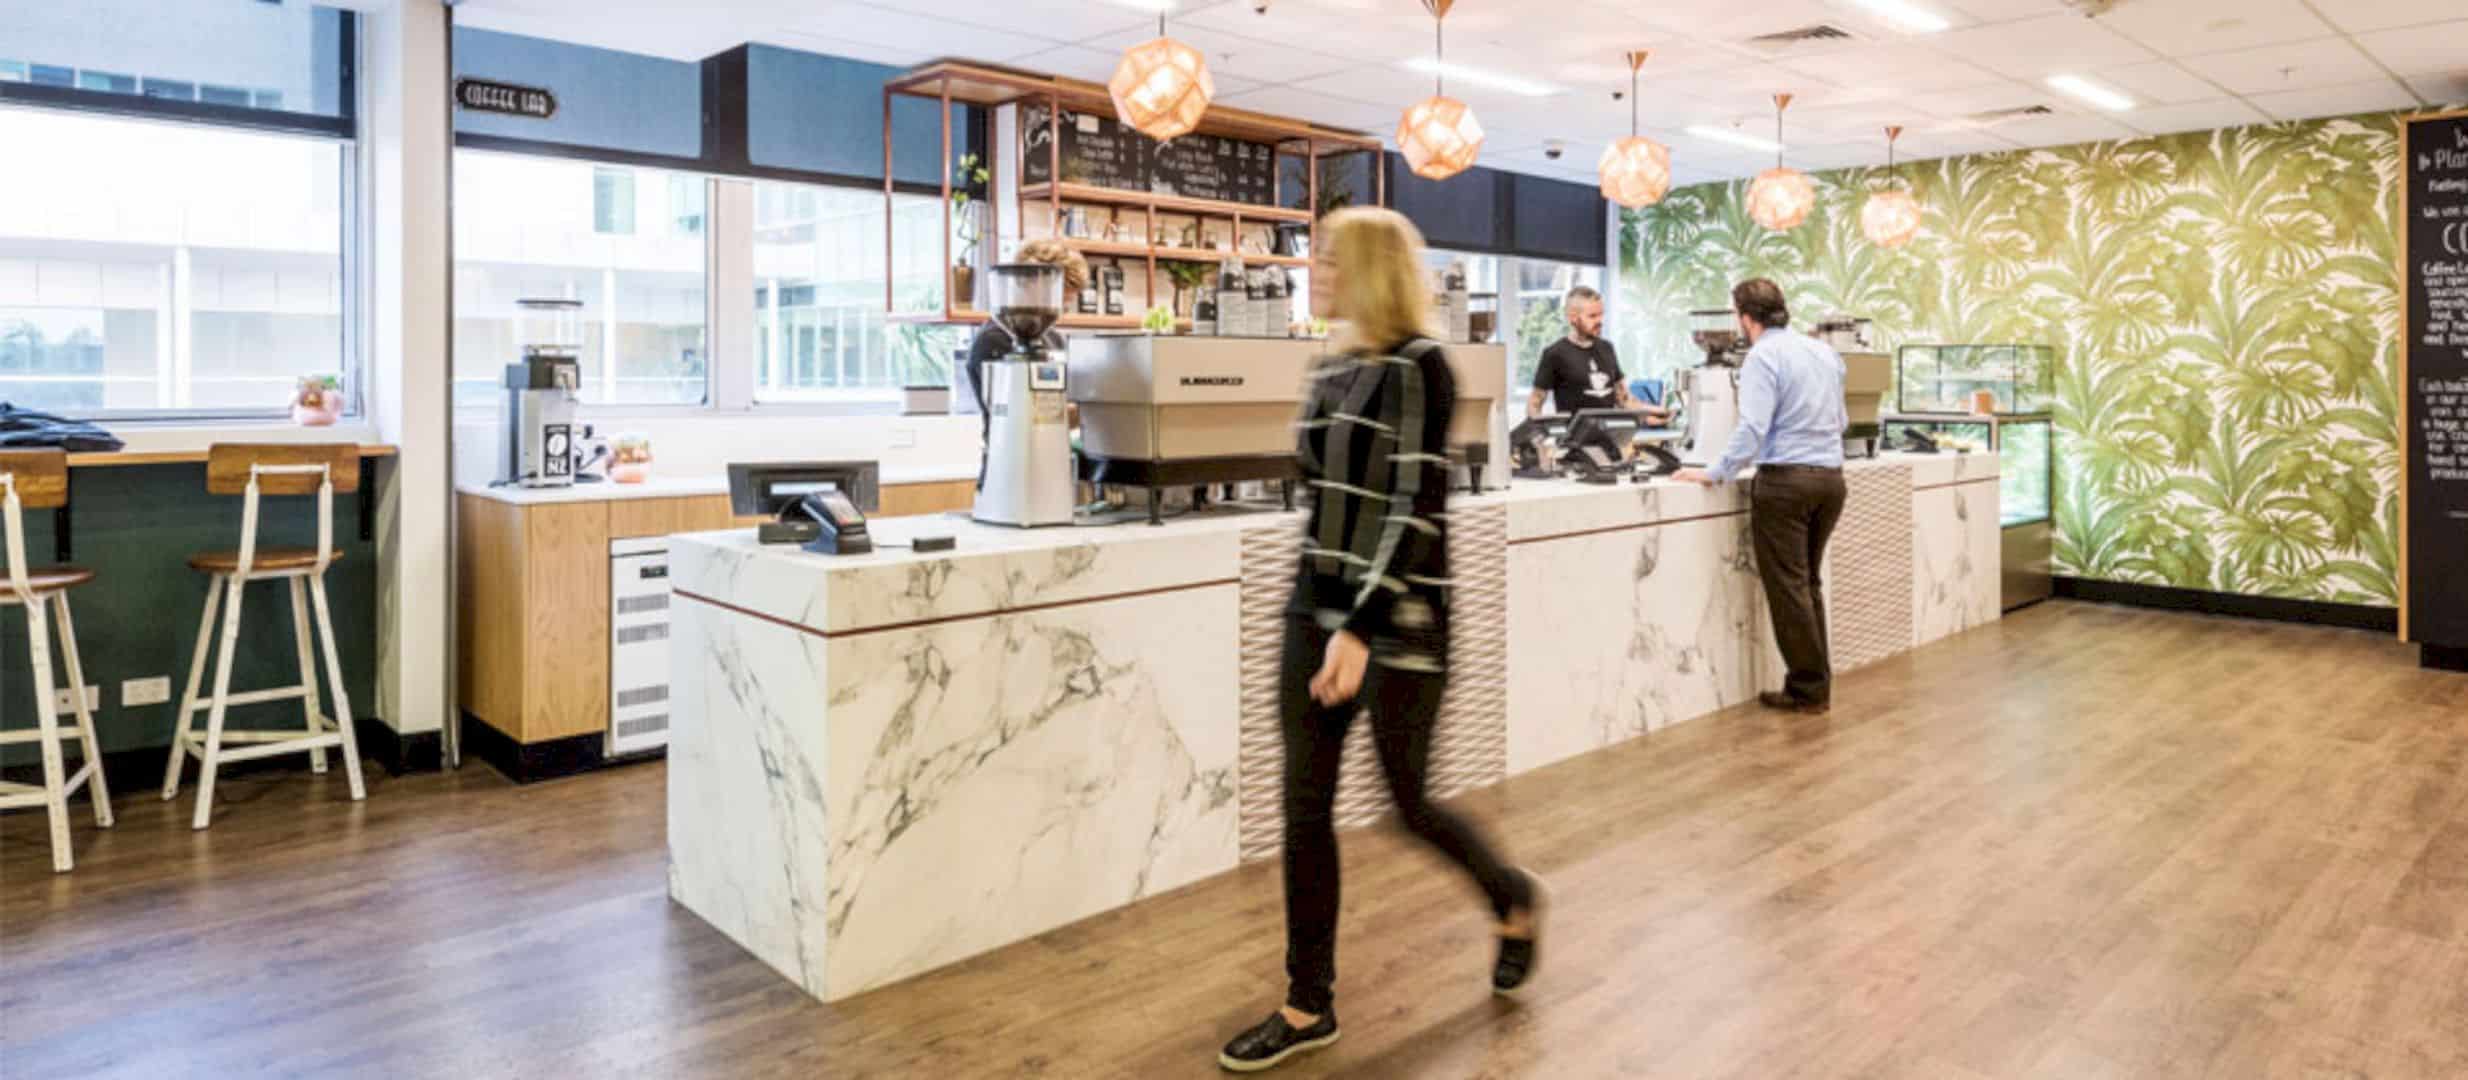 Planet Espresso Light Bright And Welcoming Boutique Café In Auckland City Hospital 1